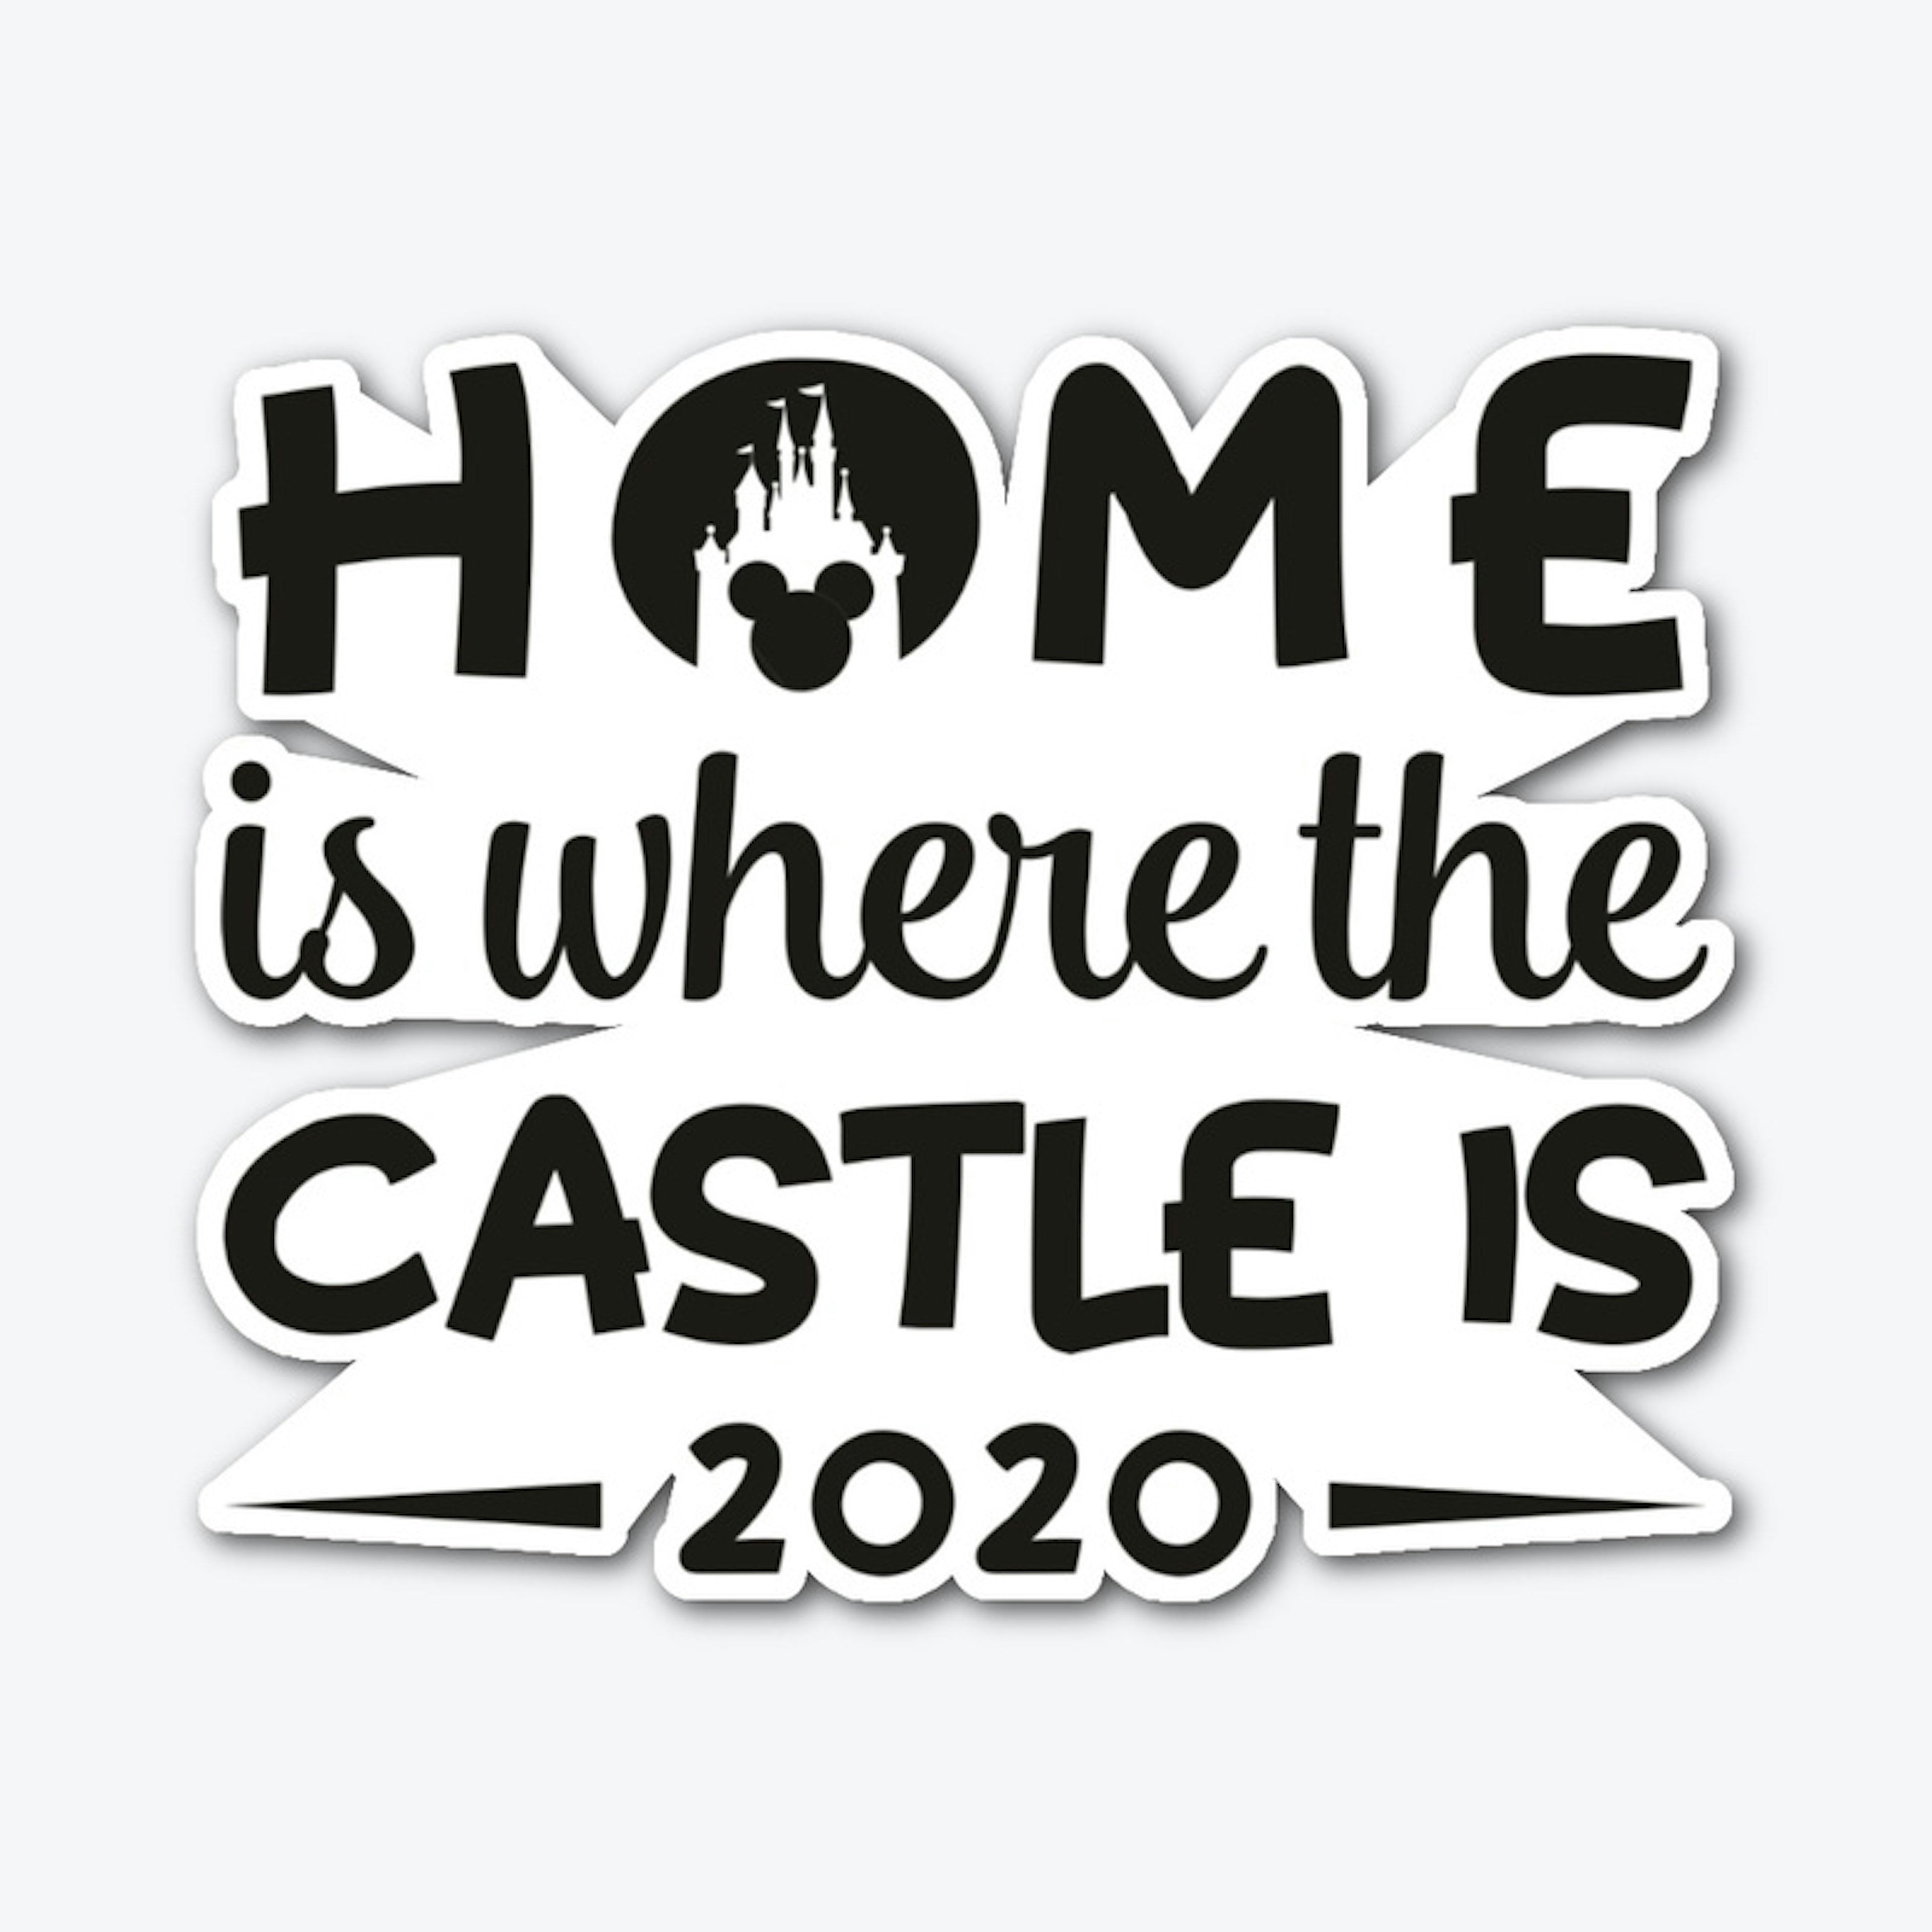 Home is where the Castle is!